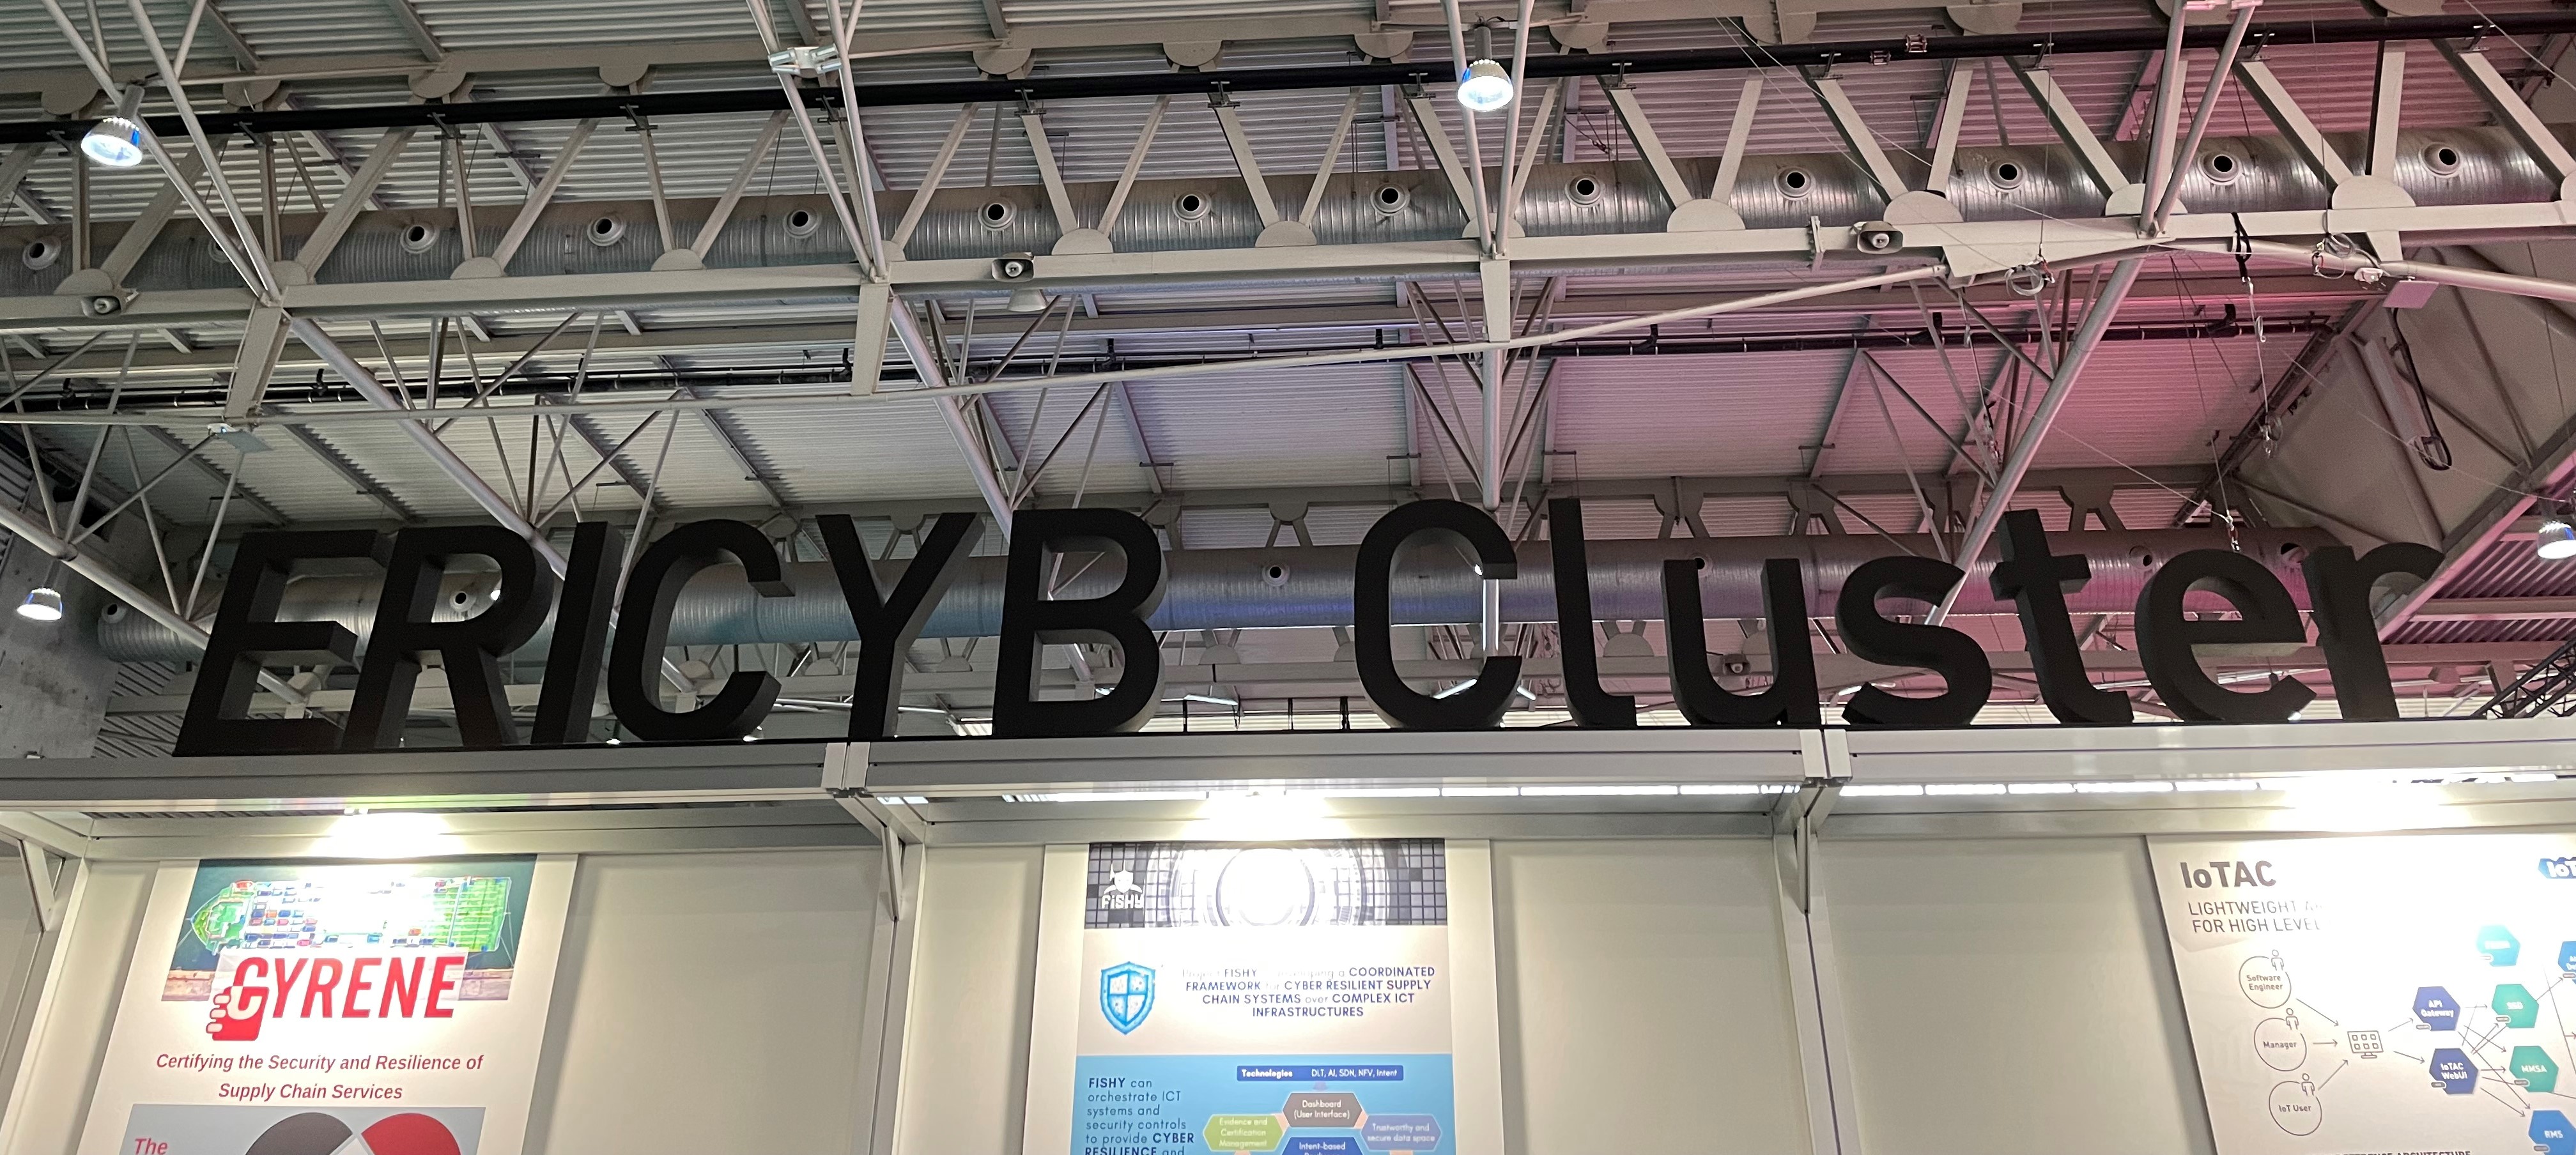 EriCYB Cluster -sign on the wall in Barcelona Cybersecurity Congress